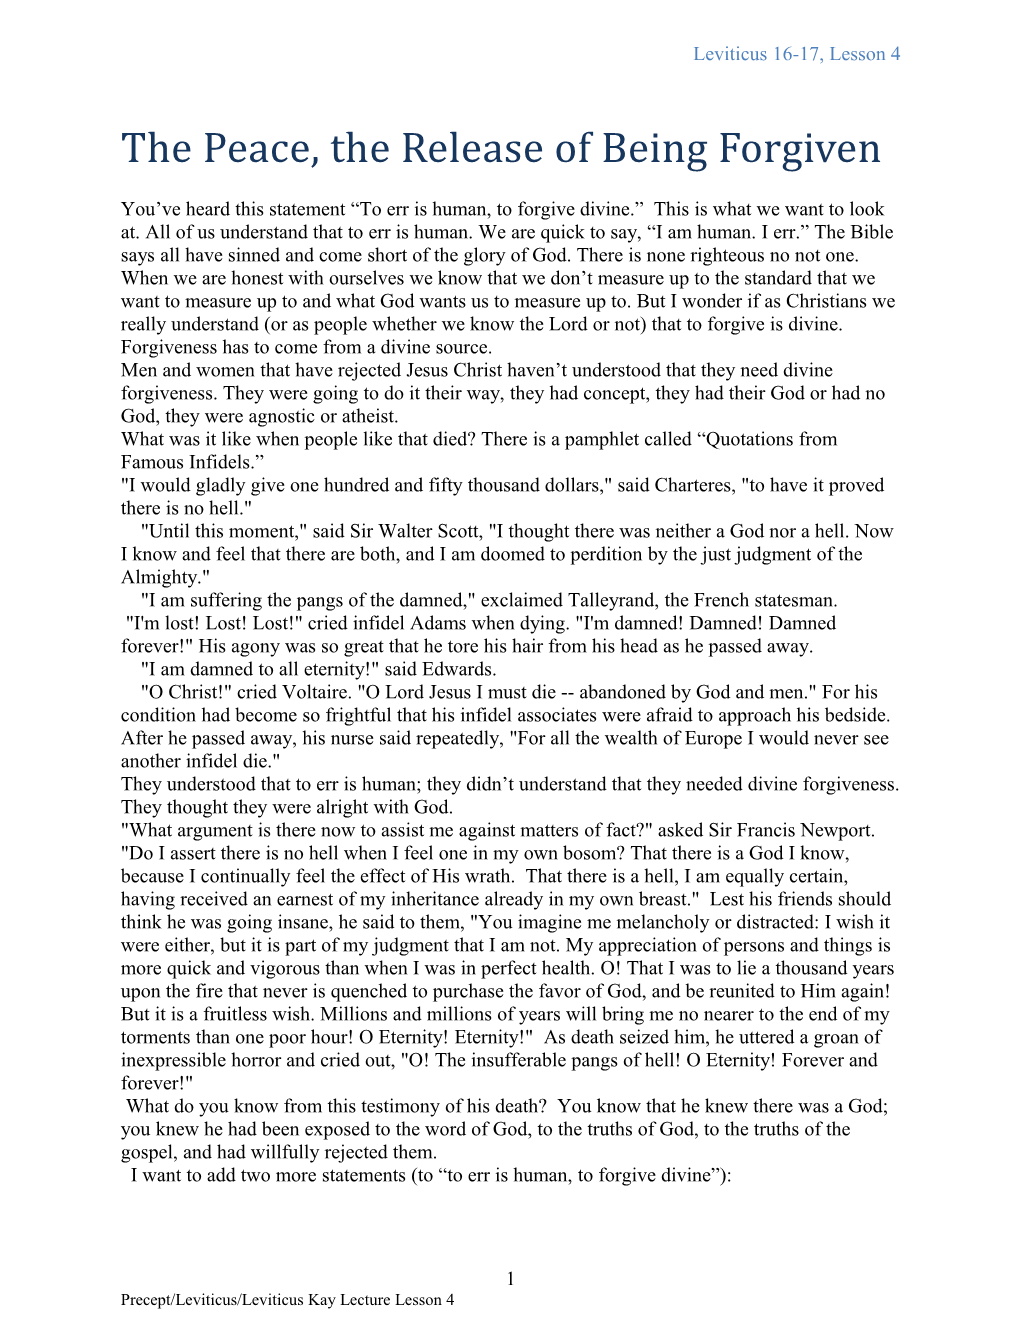 The Peace, the Release of Being Forgiven